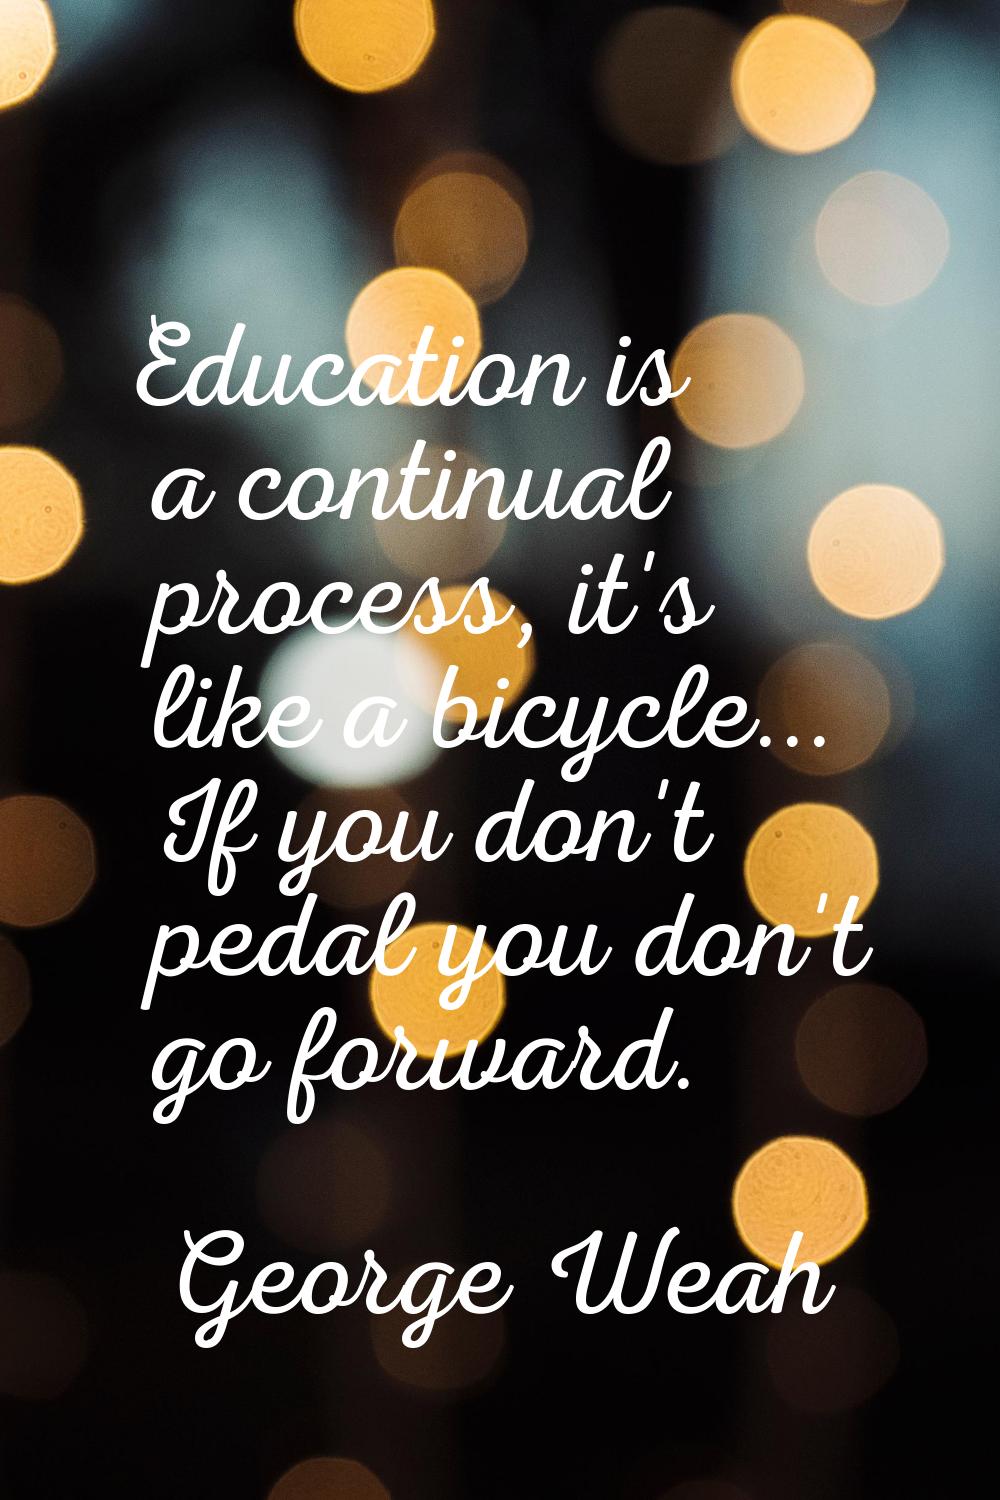 Education is a continual process, it's like a bicycle... If you don't pedal you don't go forward.